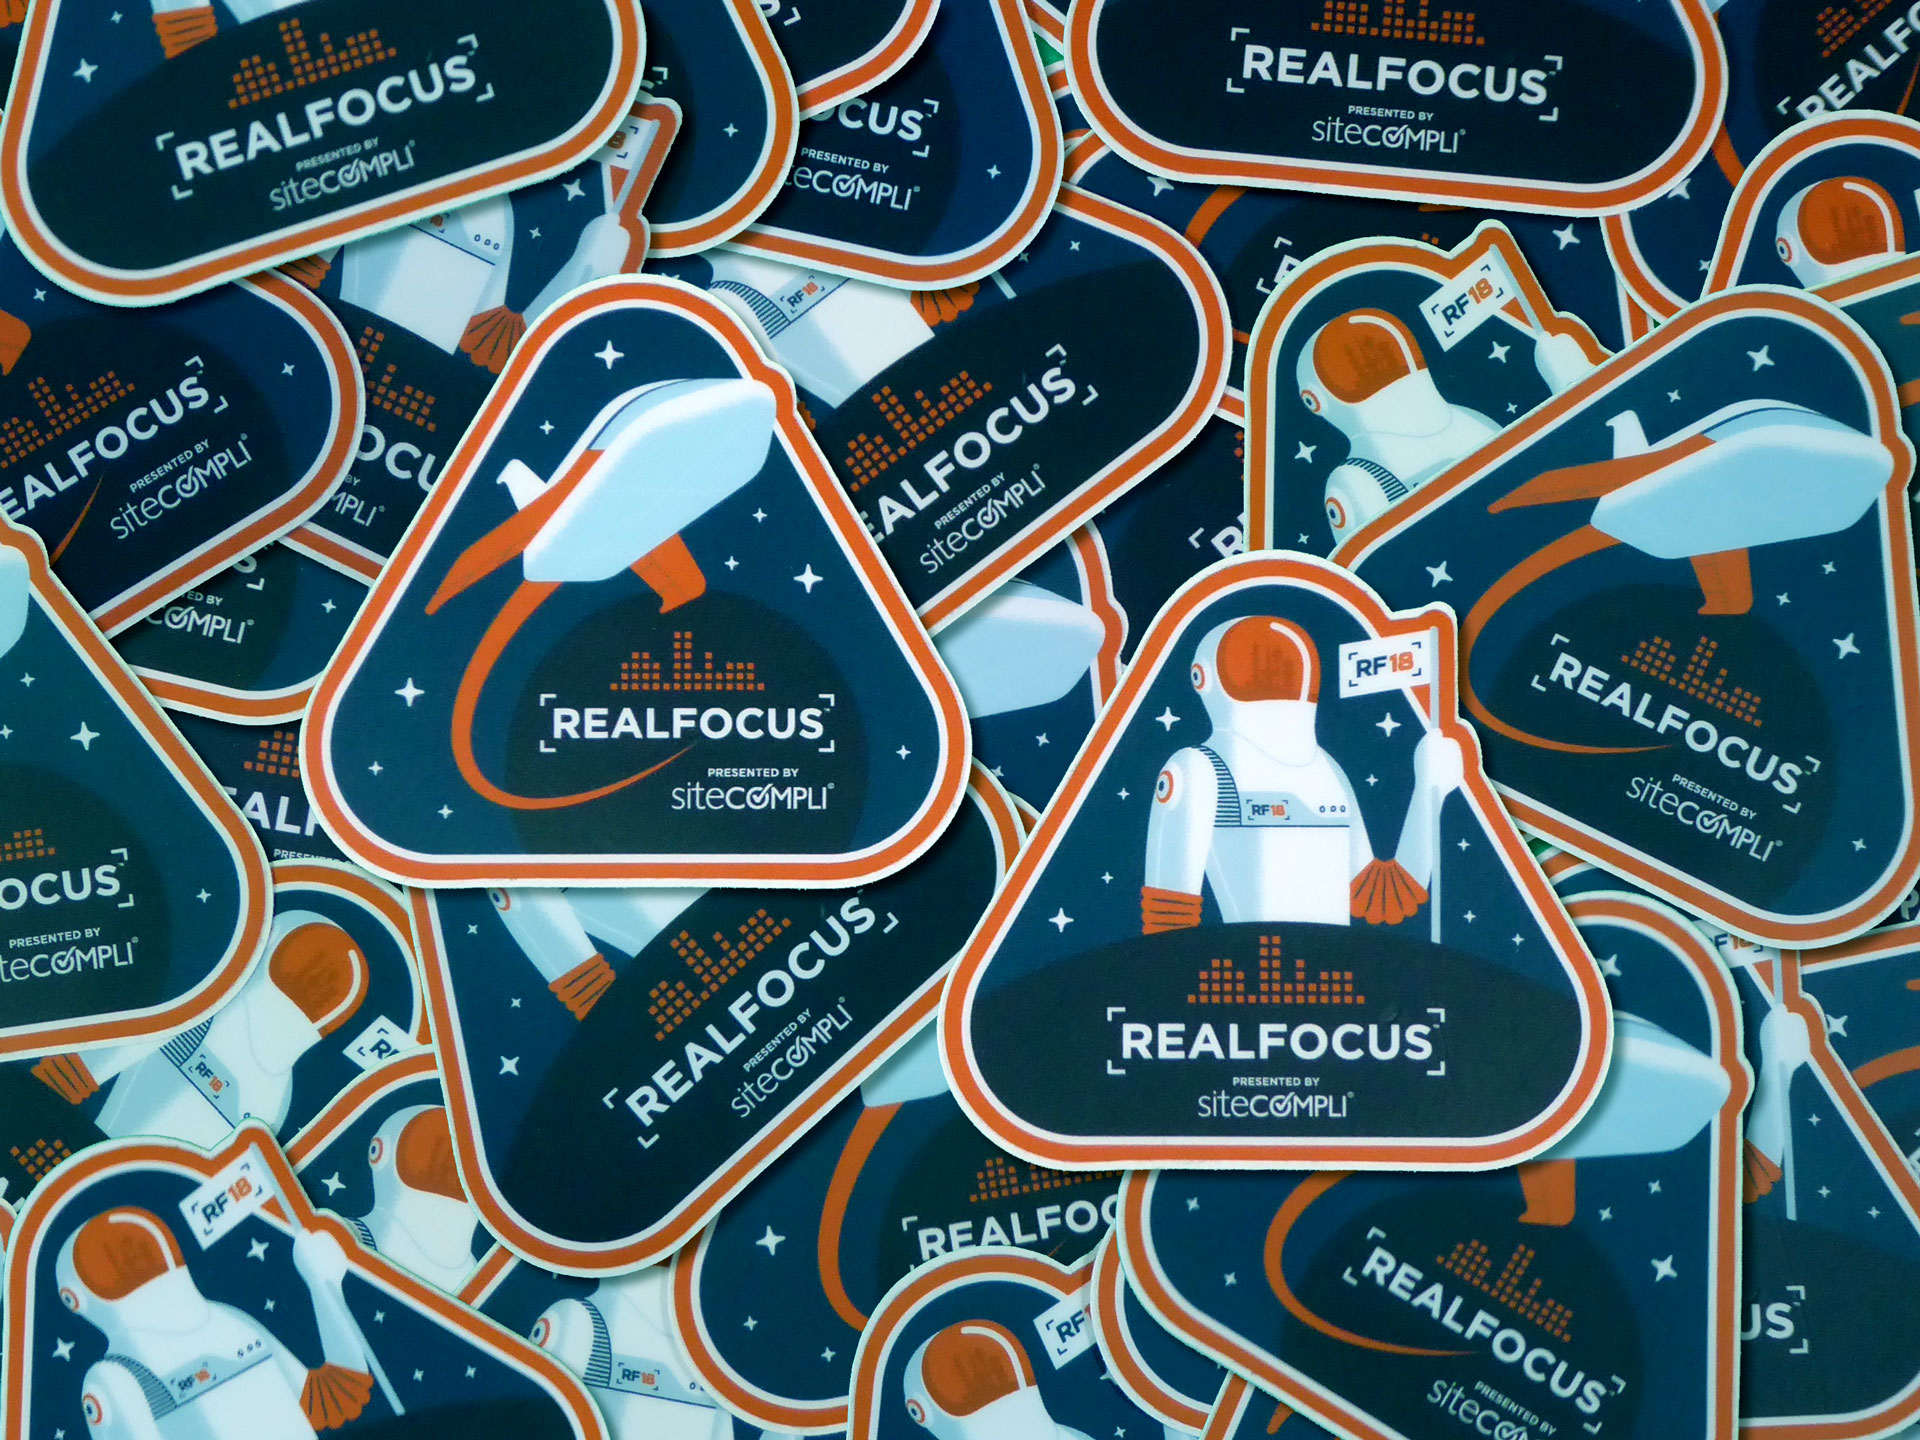 Real Focus 2018 Directory Signage